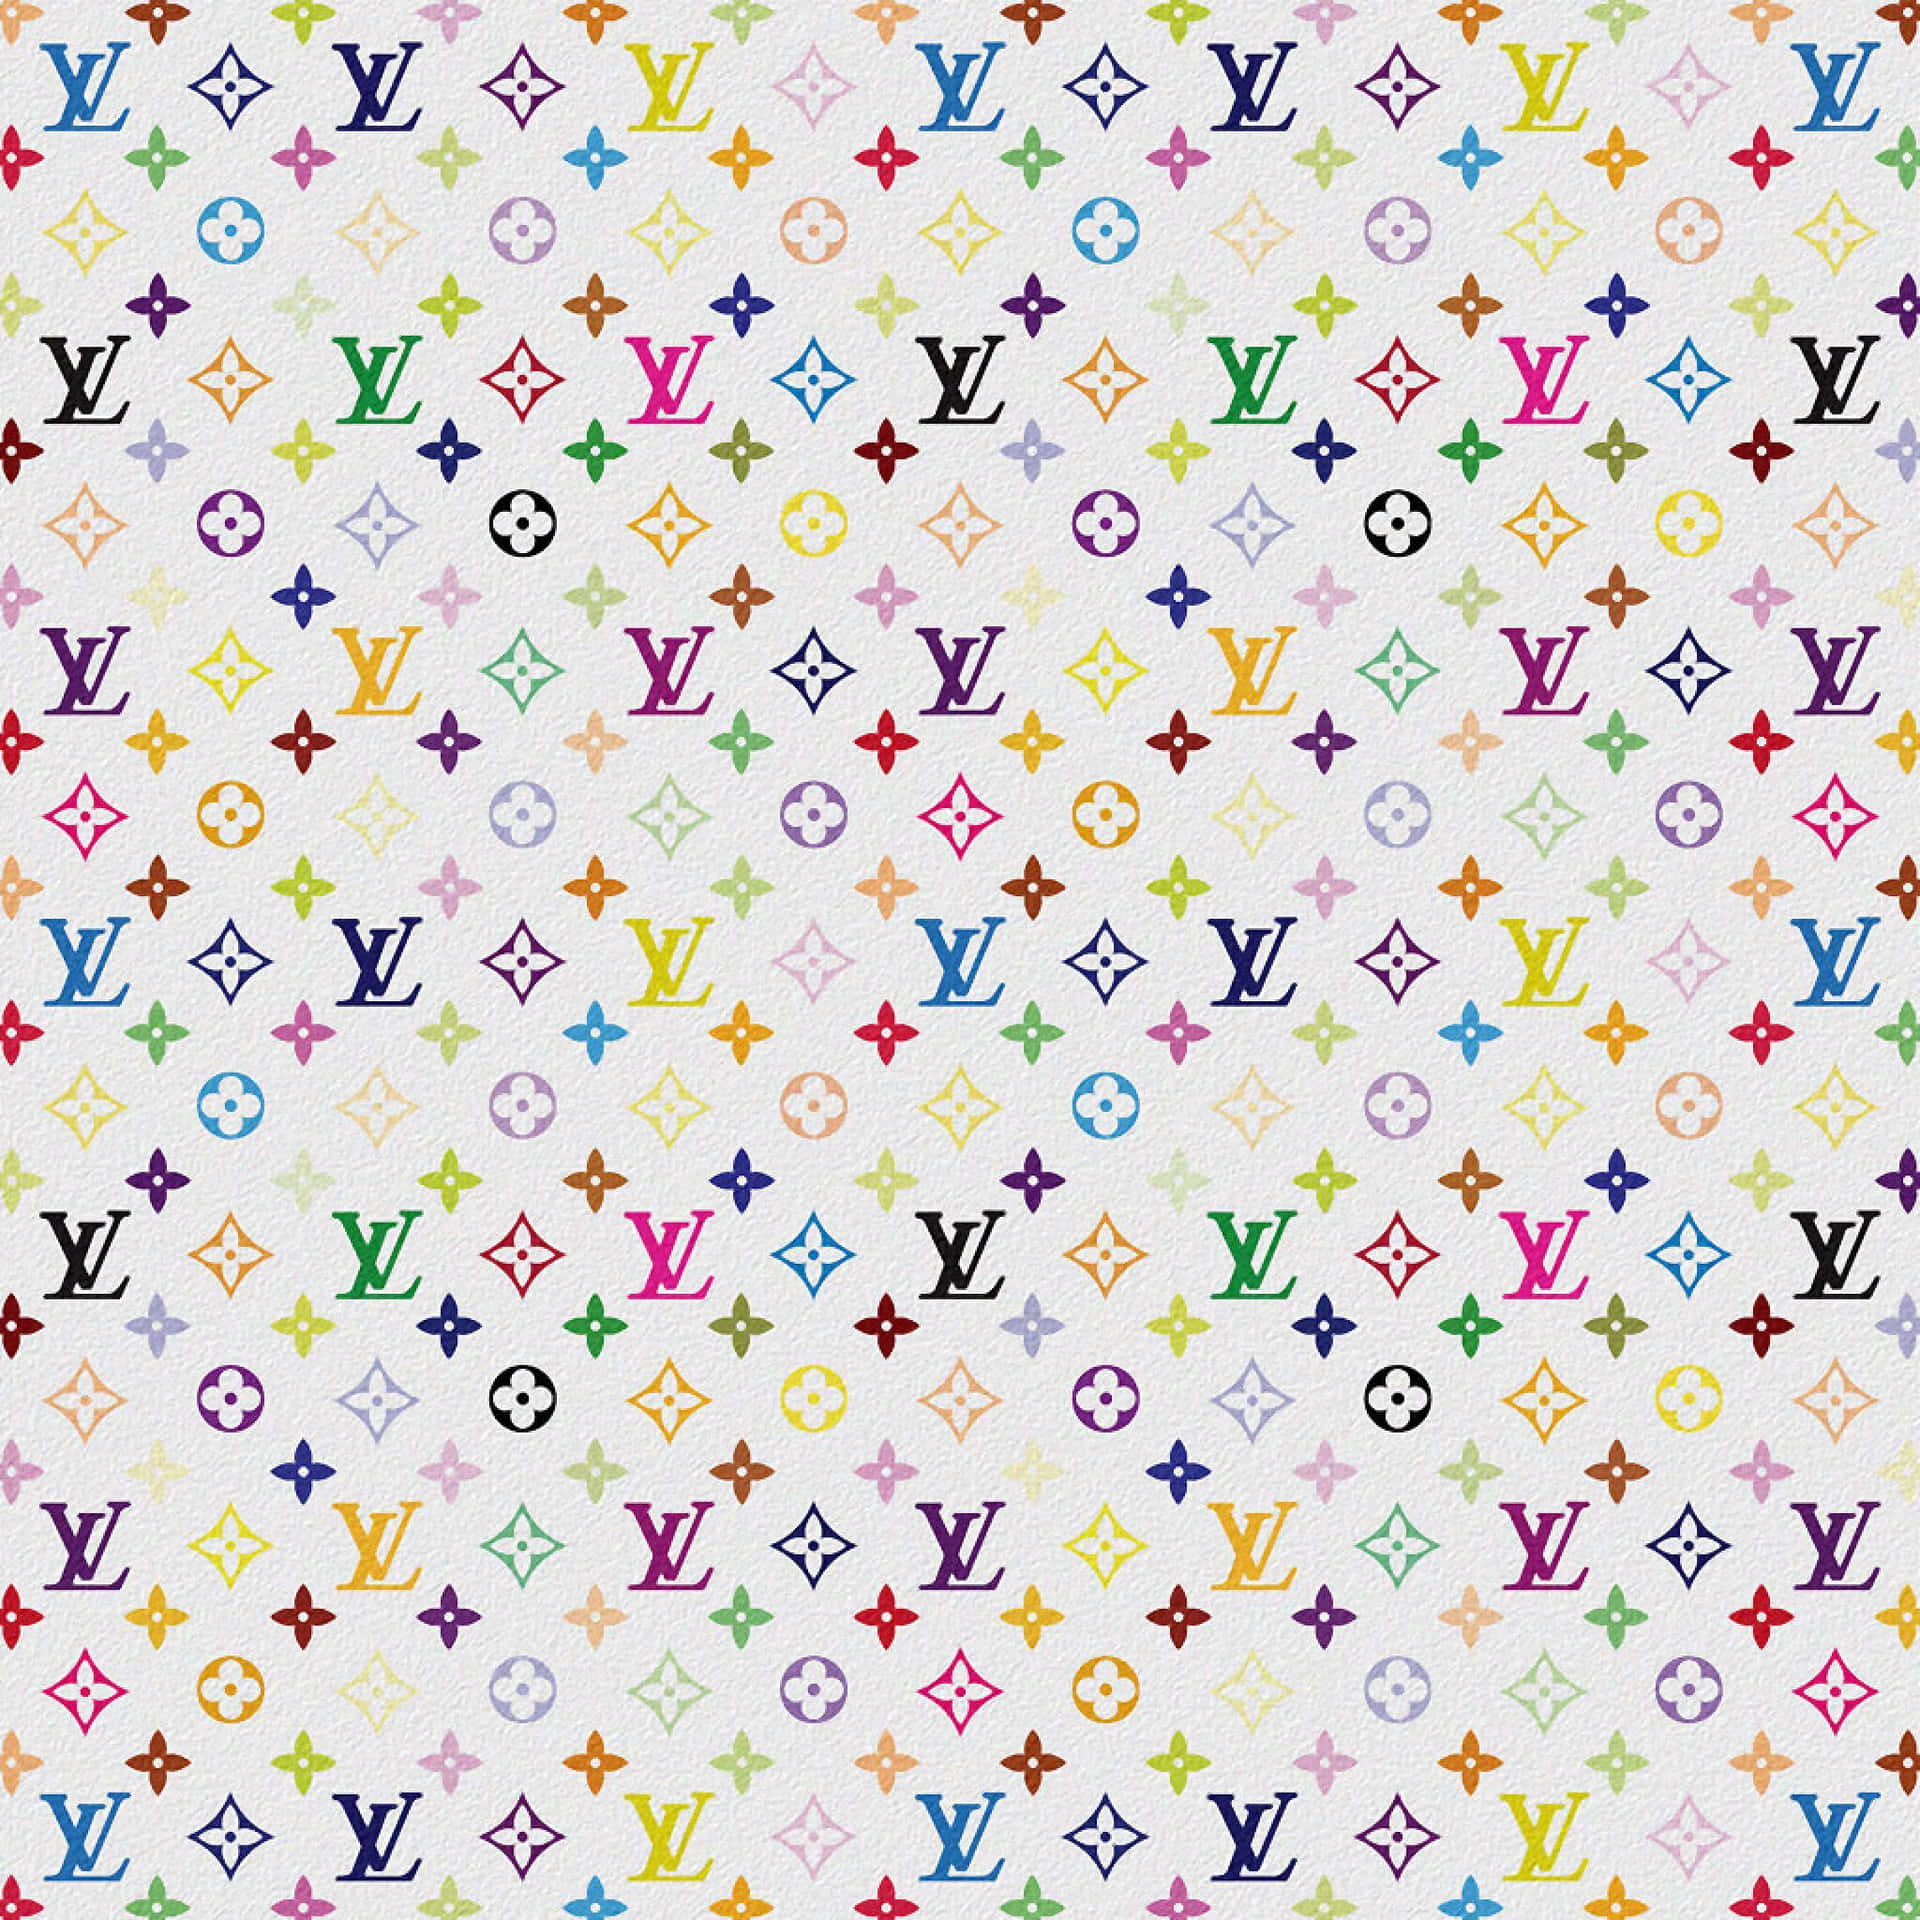 Download Spice up your wardrobe with stylish Louis Vuitton printed